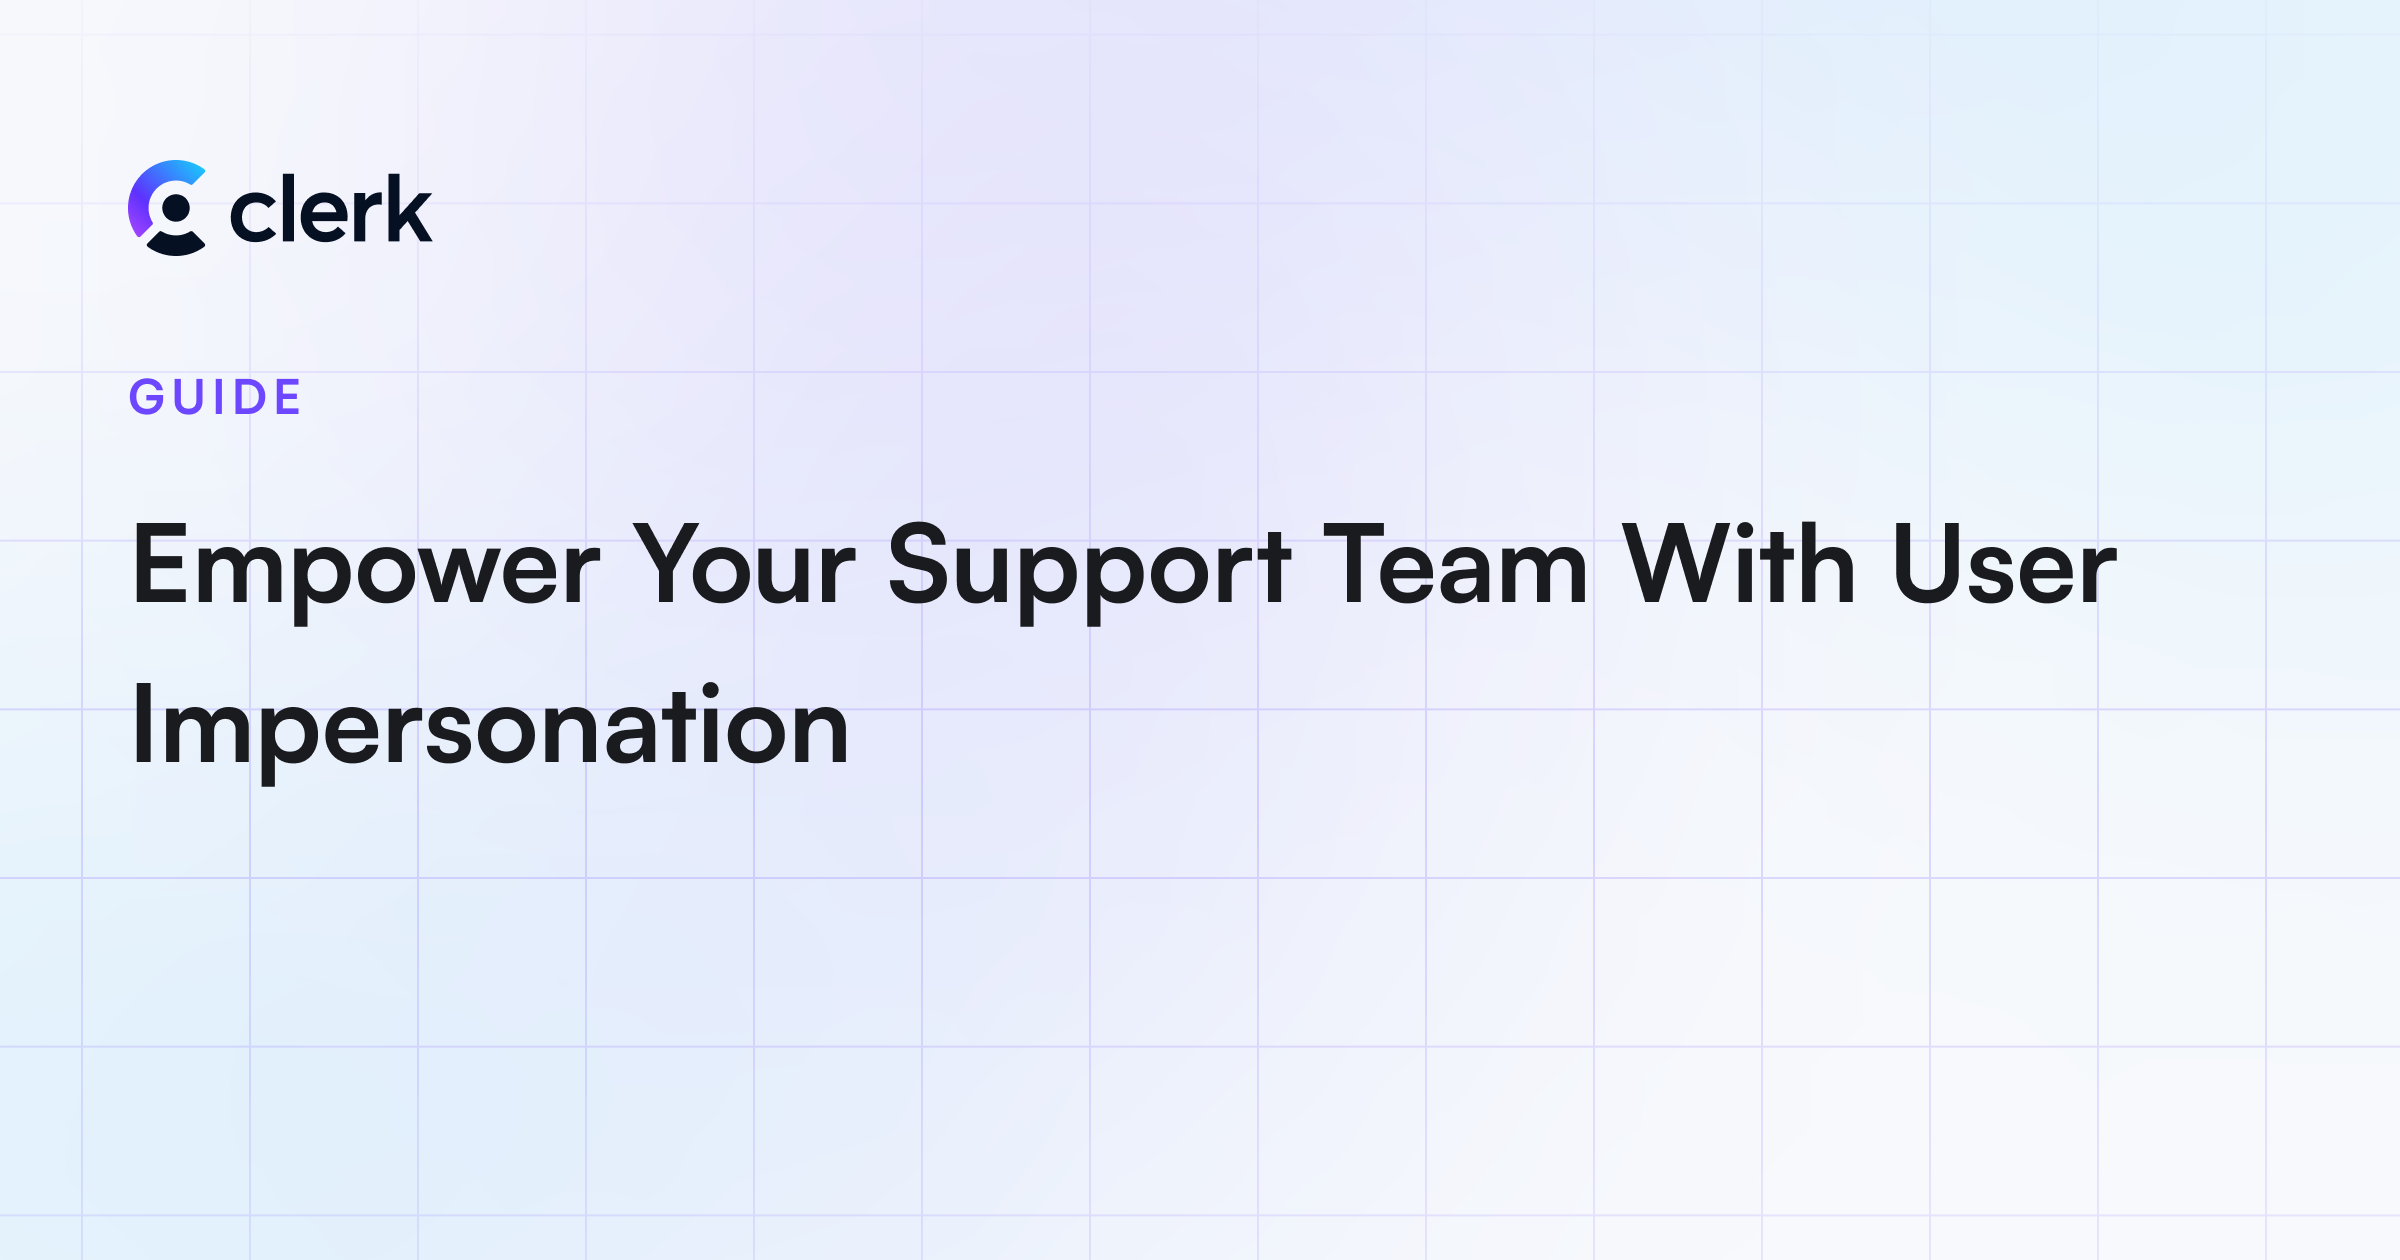 Empower Your Support Team With User Impersonation